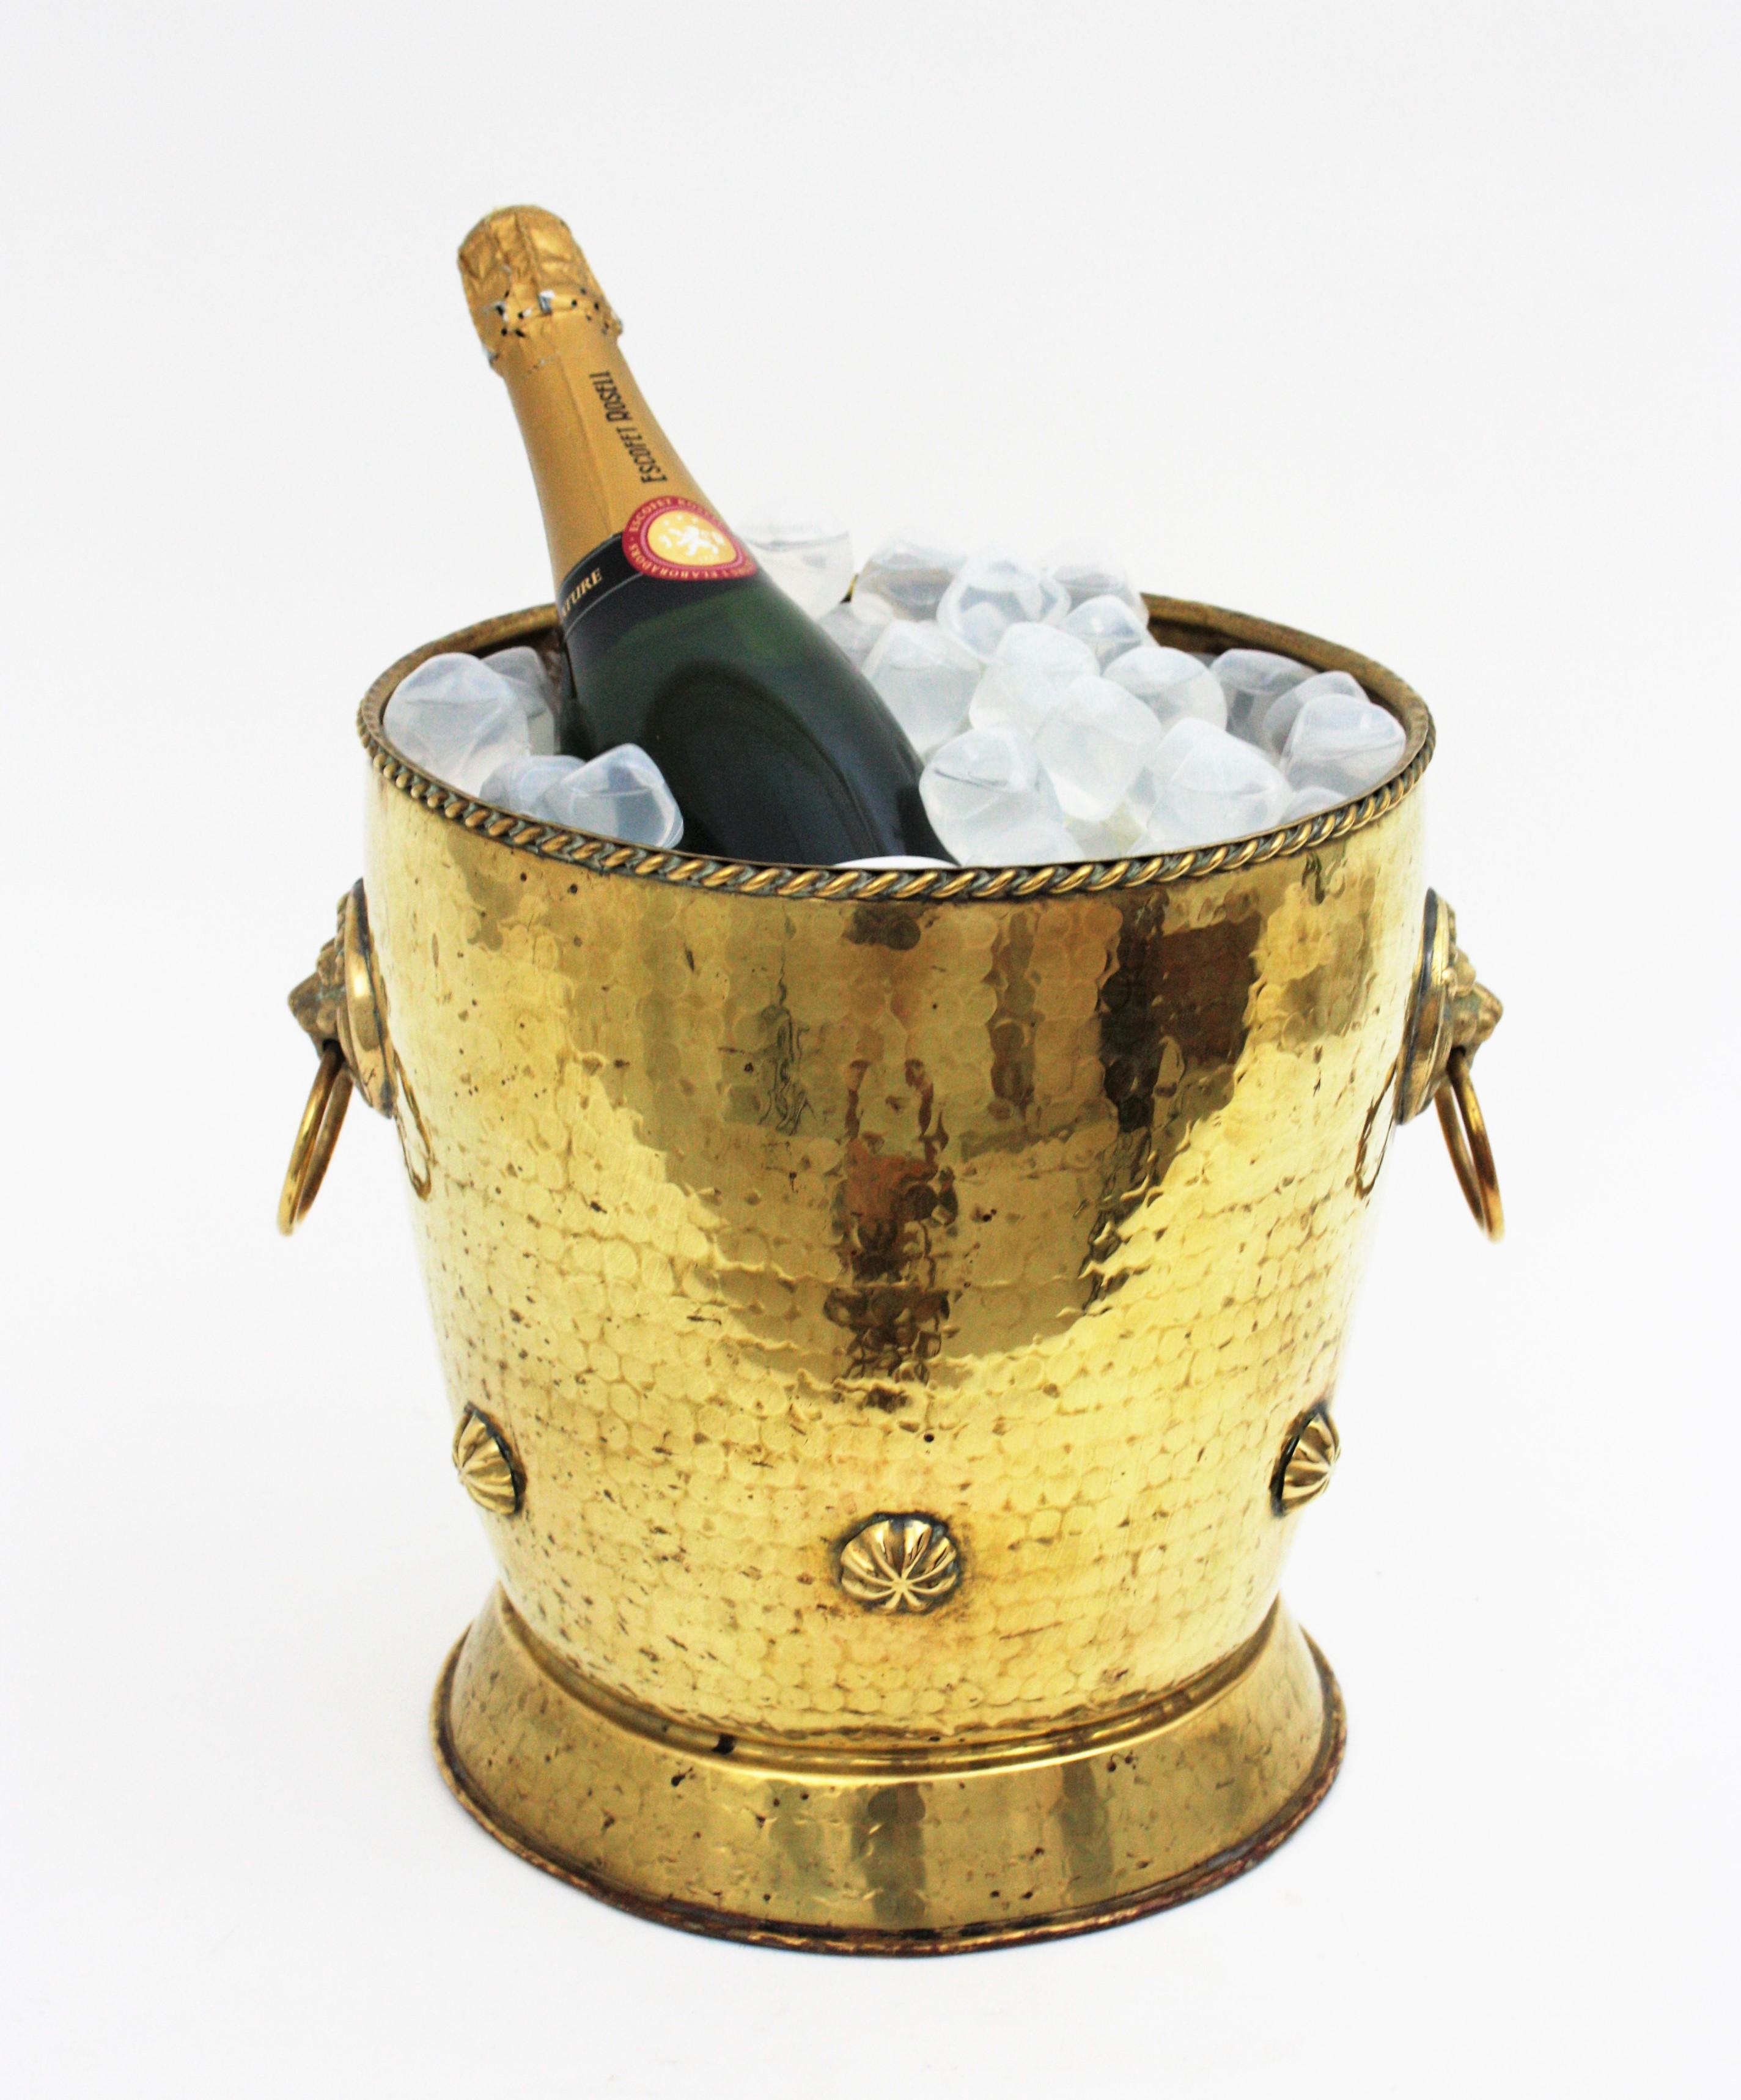 French brass ice bucket or wine / champagne cooler with lions head handles.
This hand-hammered brass cauldron is adorned by brass studs and it has a nice patina. At both sides it has lion heads holding brass rings in their mouths that serve as